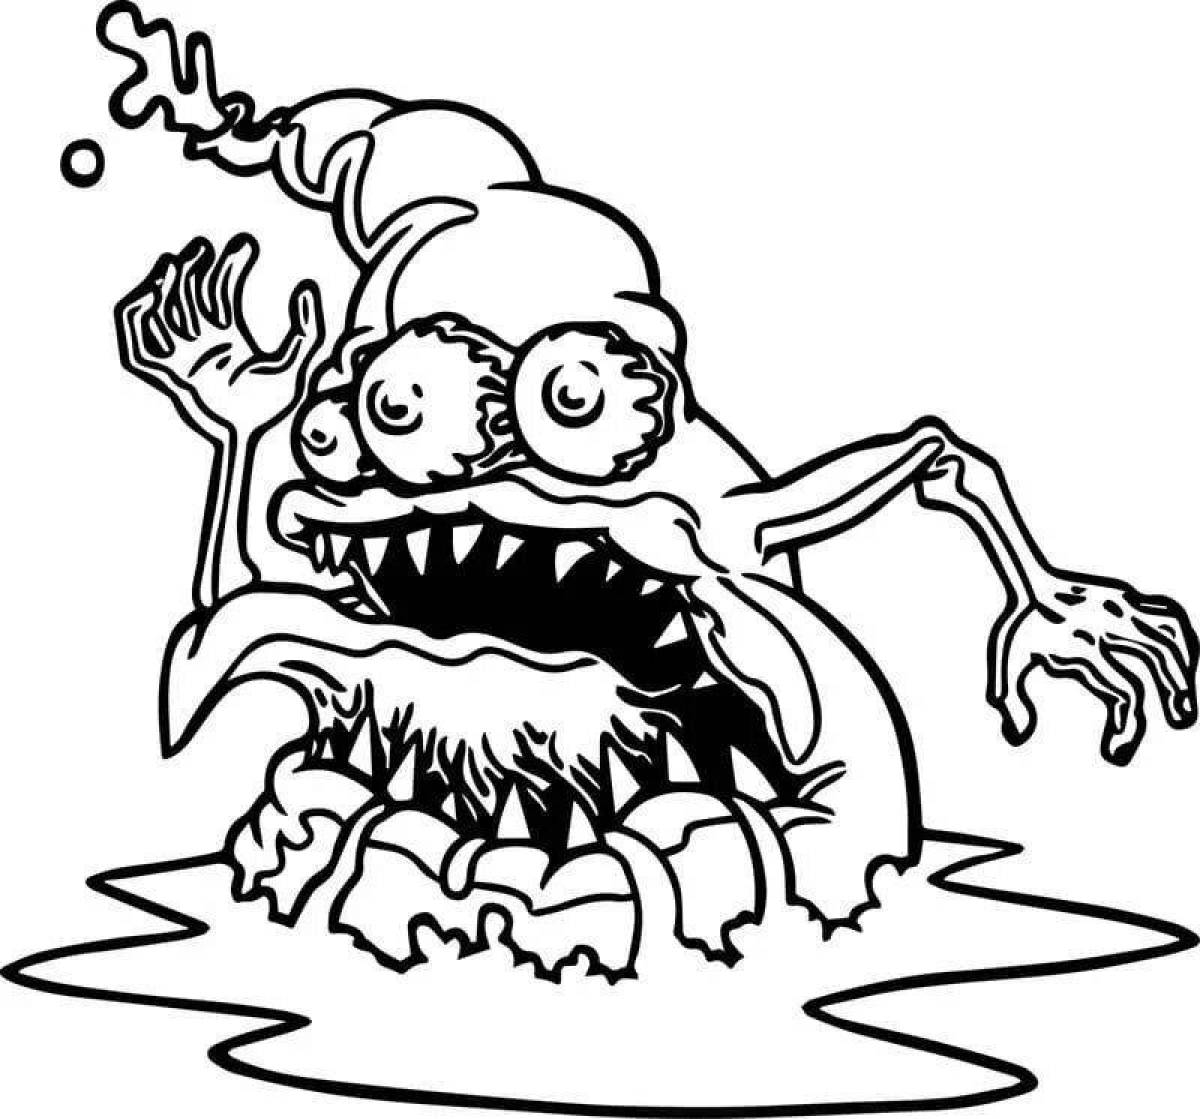 Creepy monster coloring page